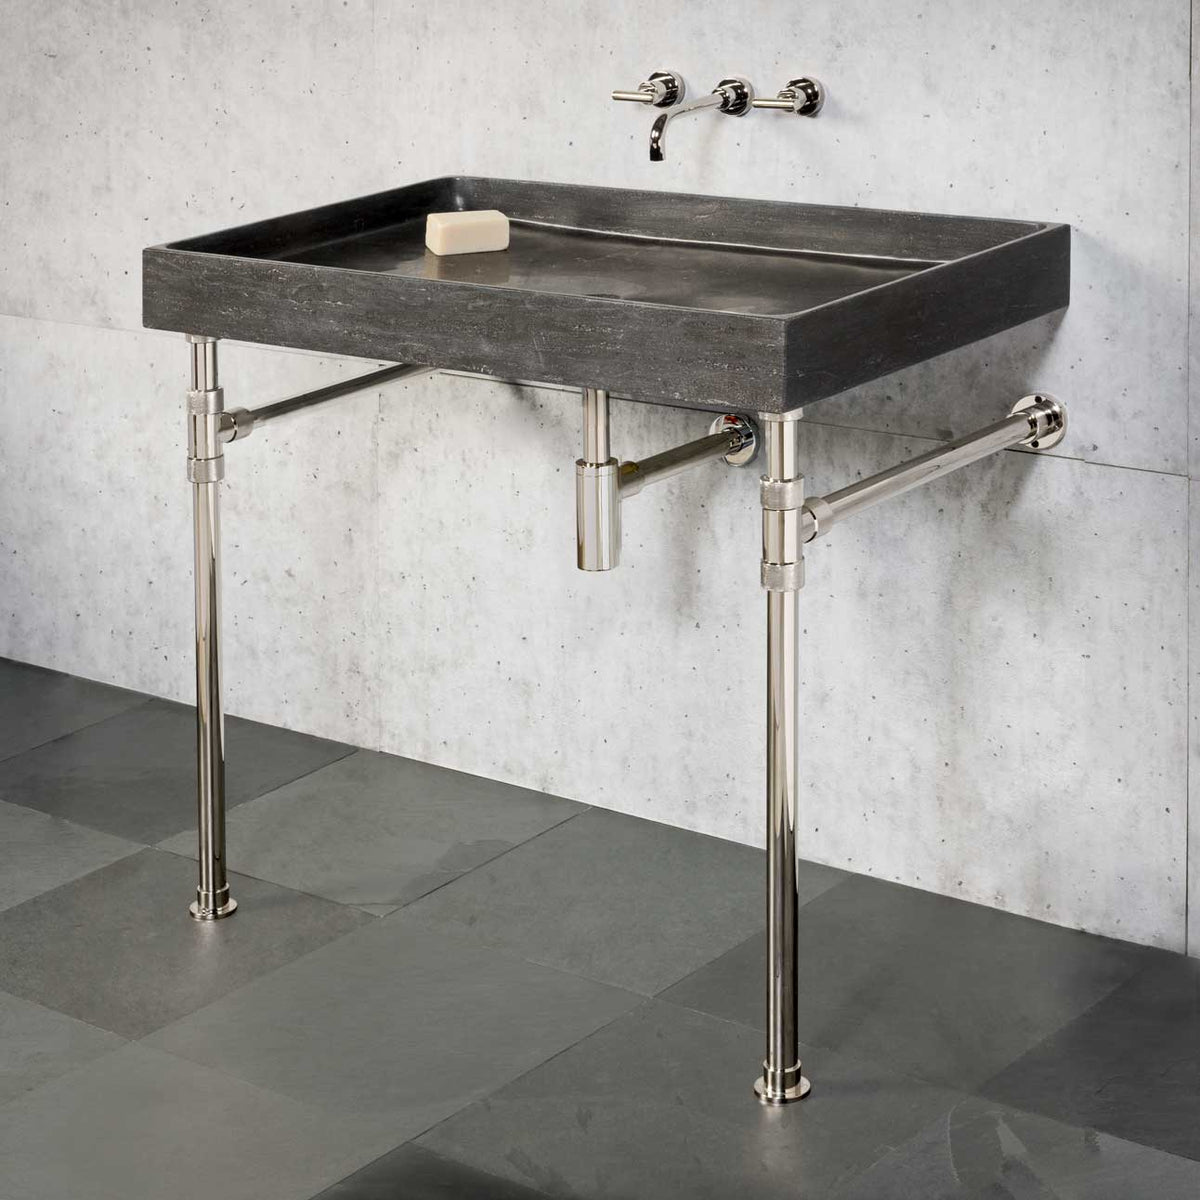 Ventus Bath Sink paired with Elemental Classic Vanity Legs image 1 of 3